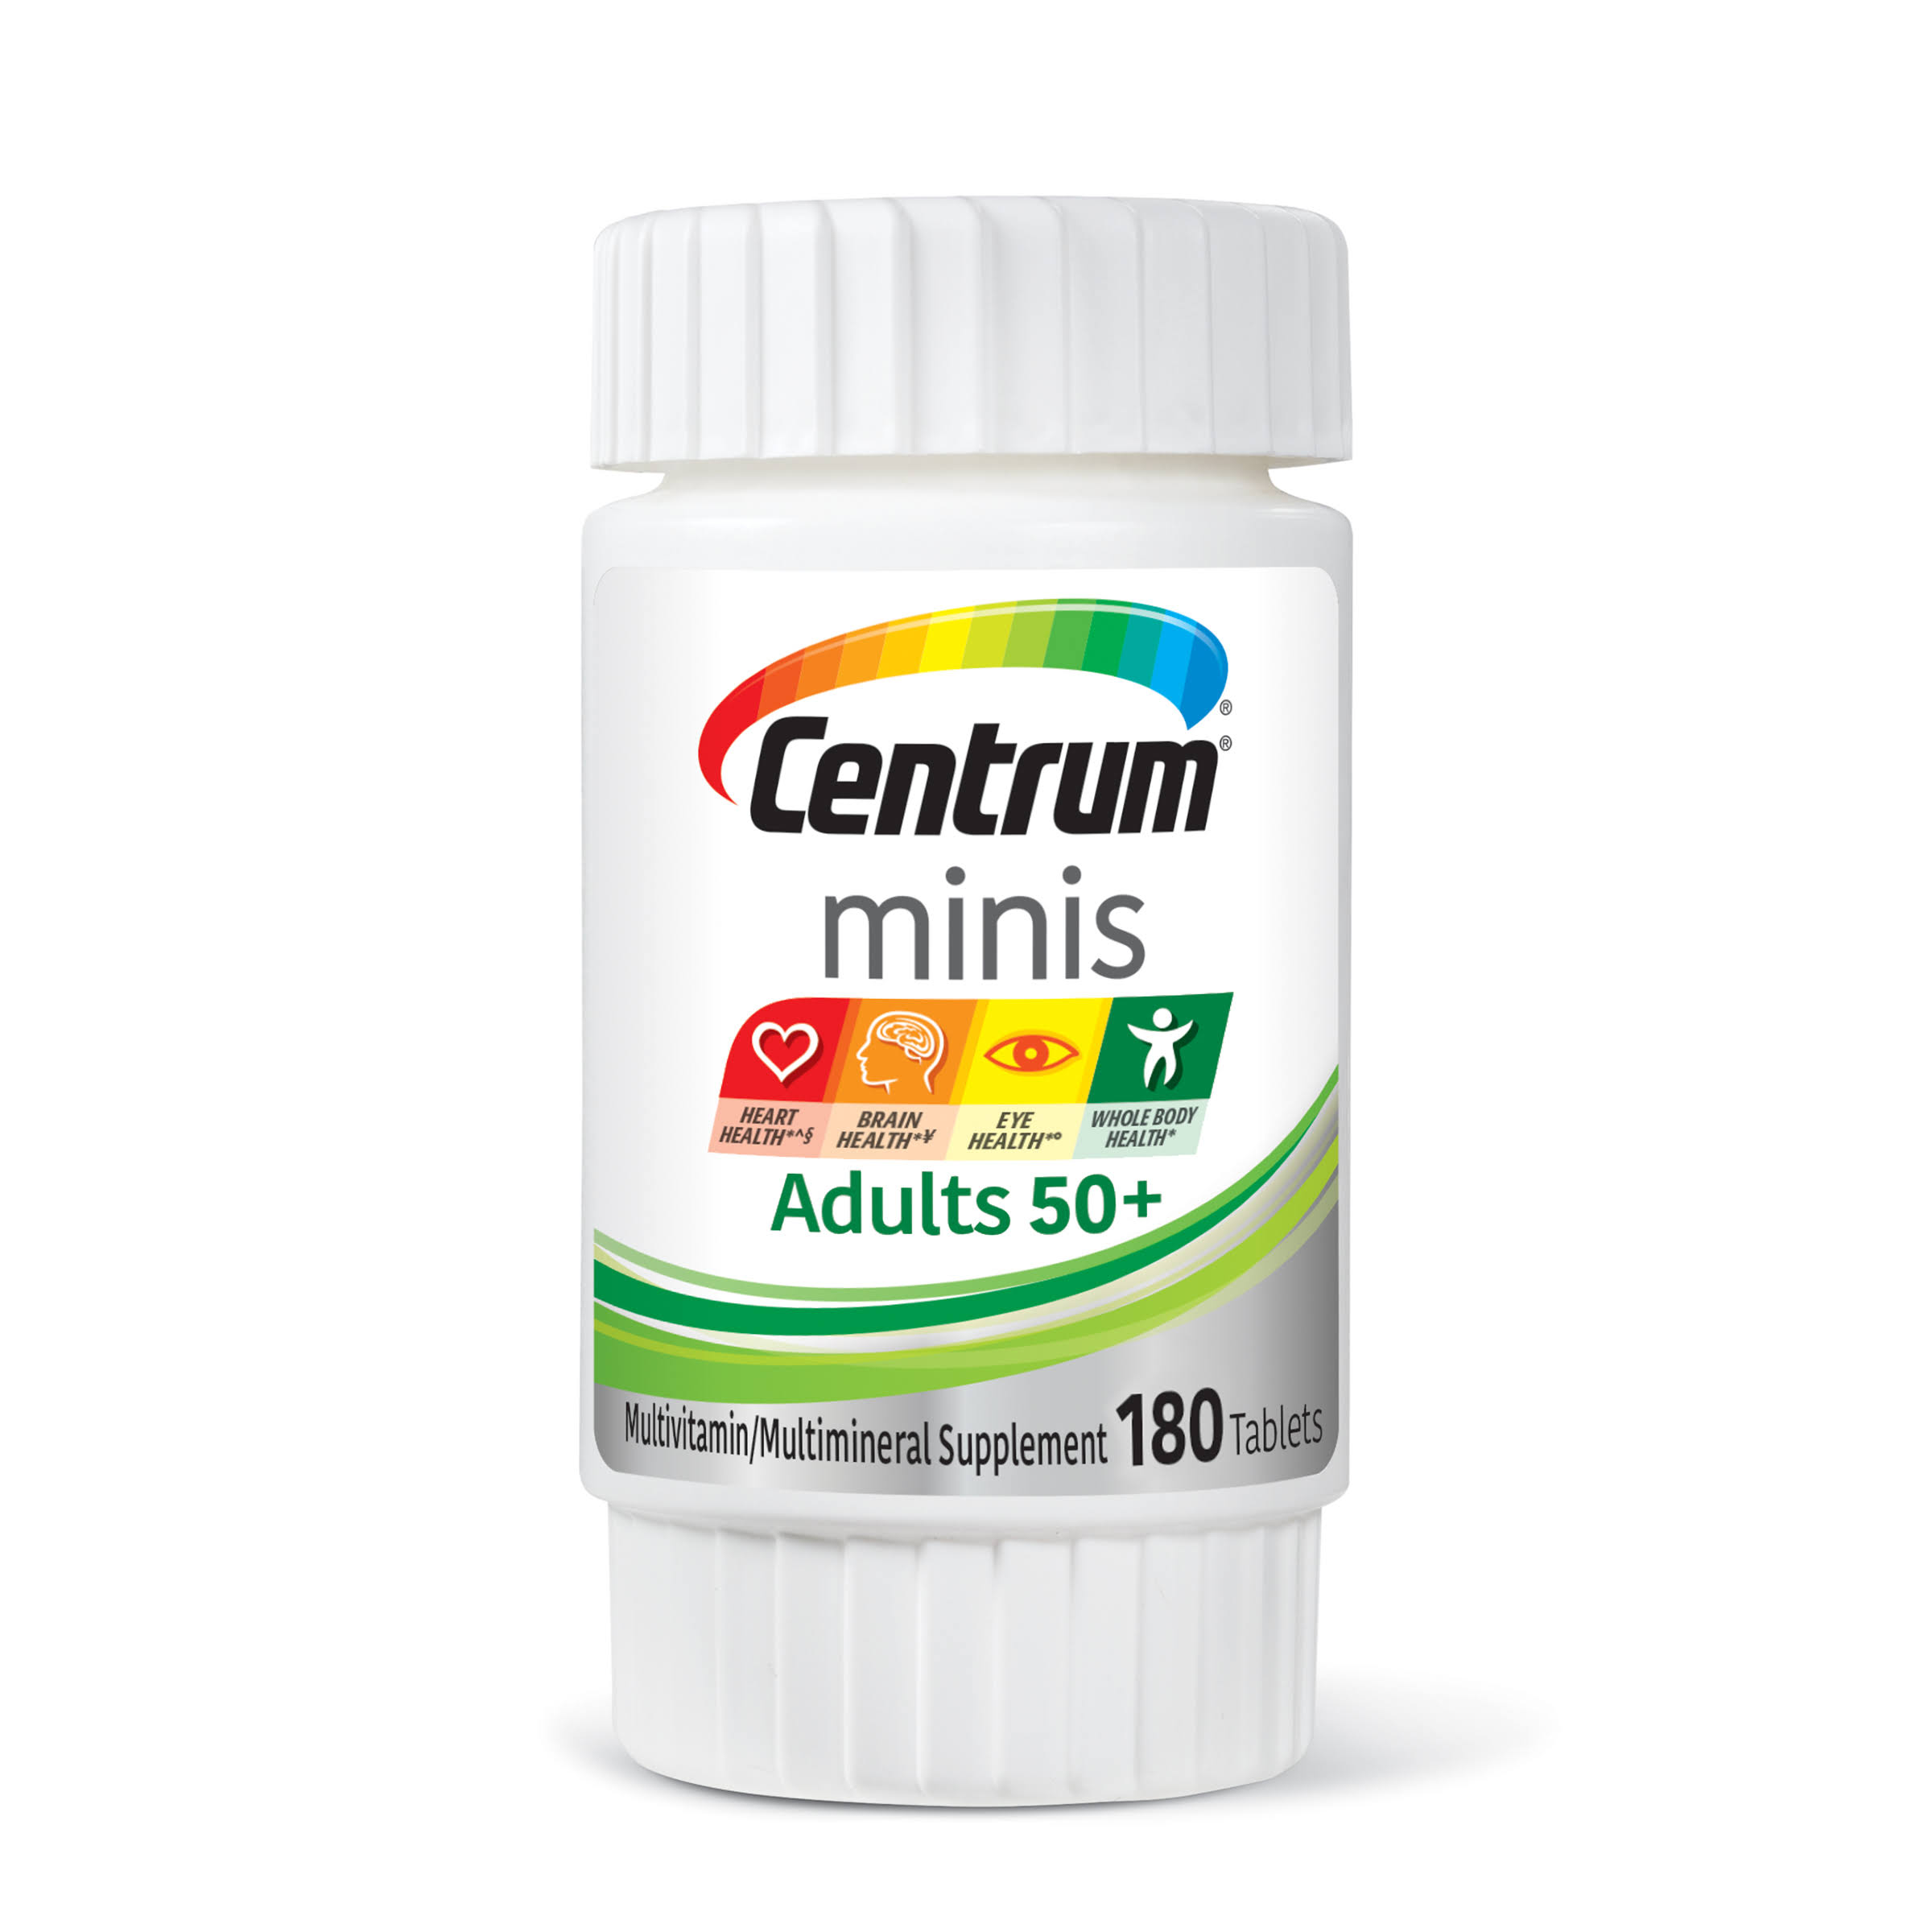 Centrum Adults 50+, Minis, Tablets - 180 tablets